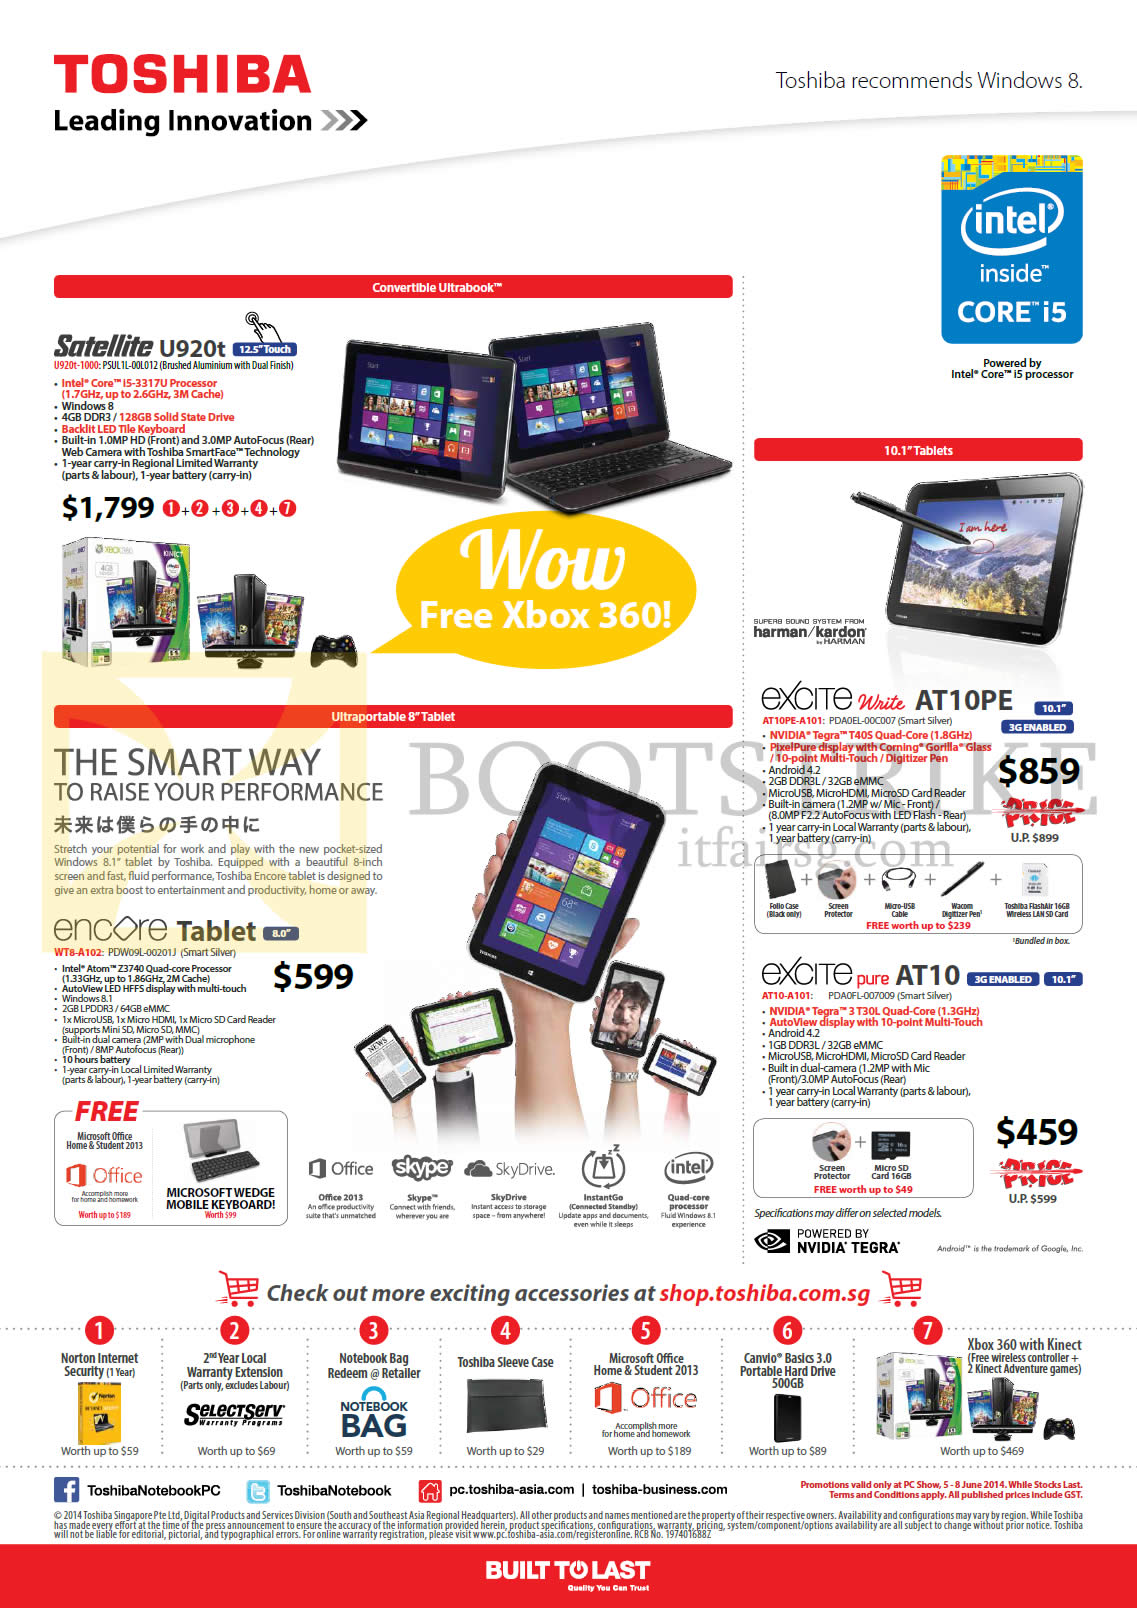 PC SHOW 2014 price list image brochure of Toshiba Notebooks, Tablets, Satellite U920t, Encore Tablet, Excite Write AT10PE, Pure AT10